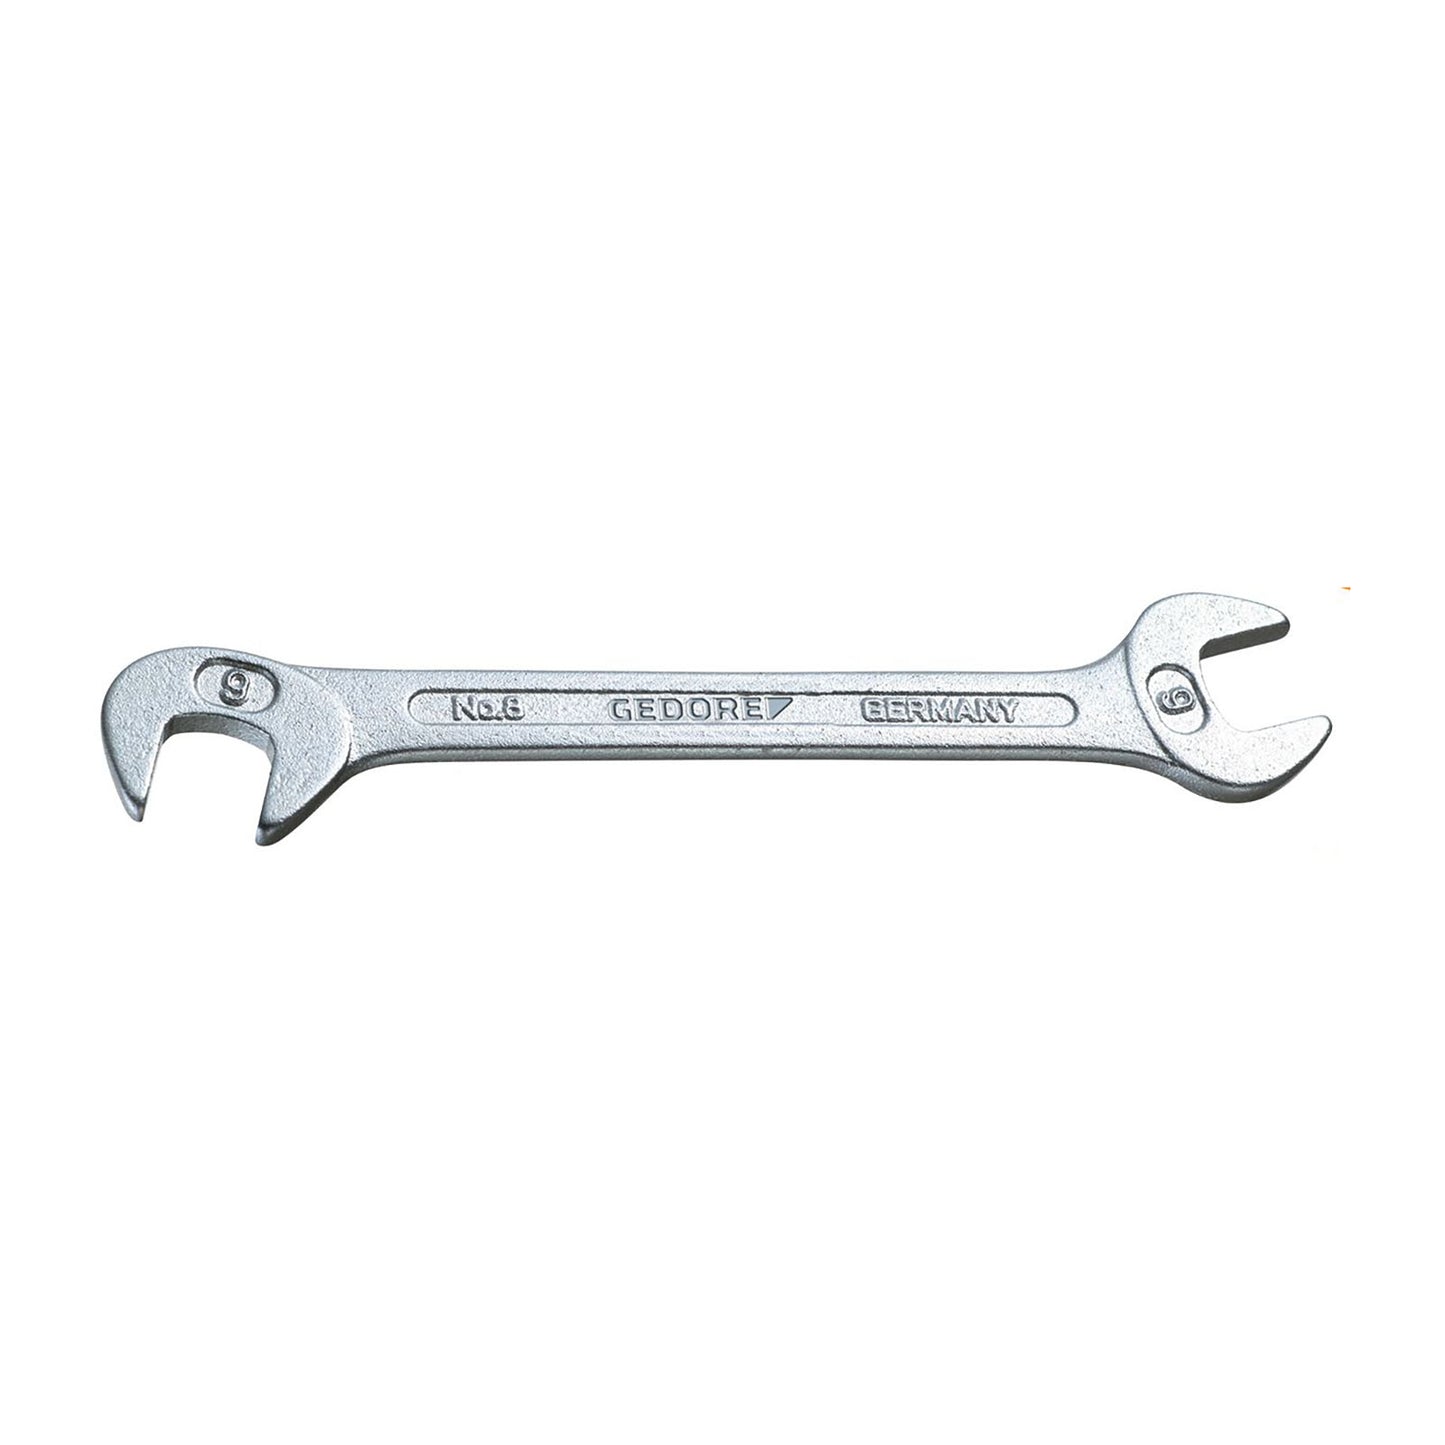 GEDORE 8 5.5 - Small Fixed Wrench, 5.5mm (6094200)